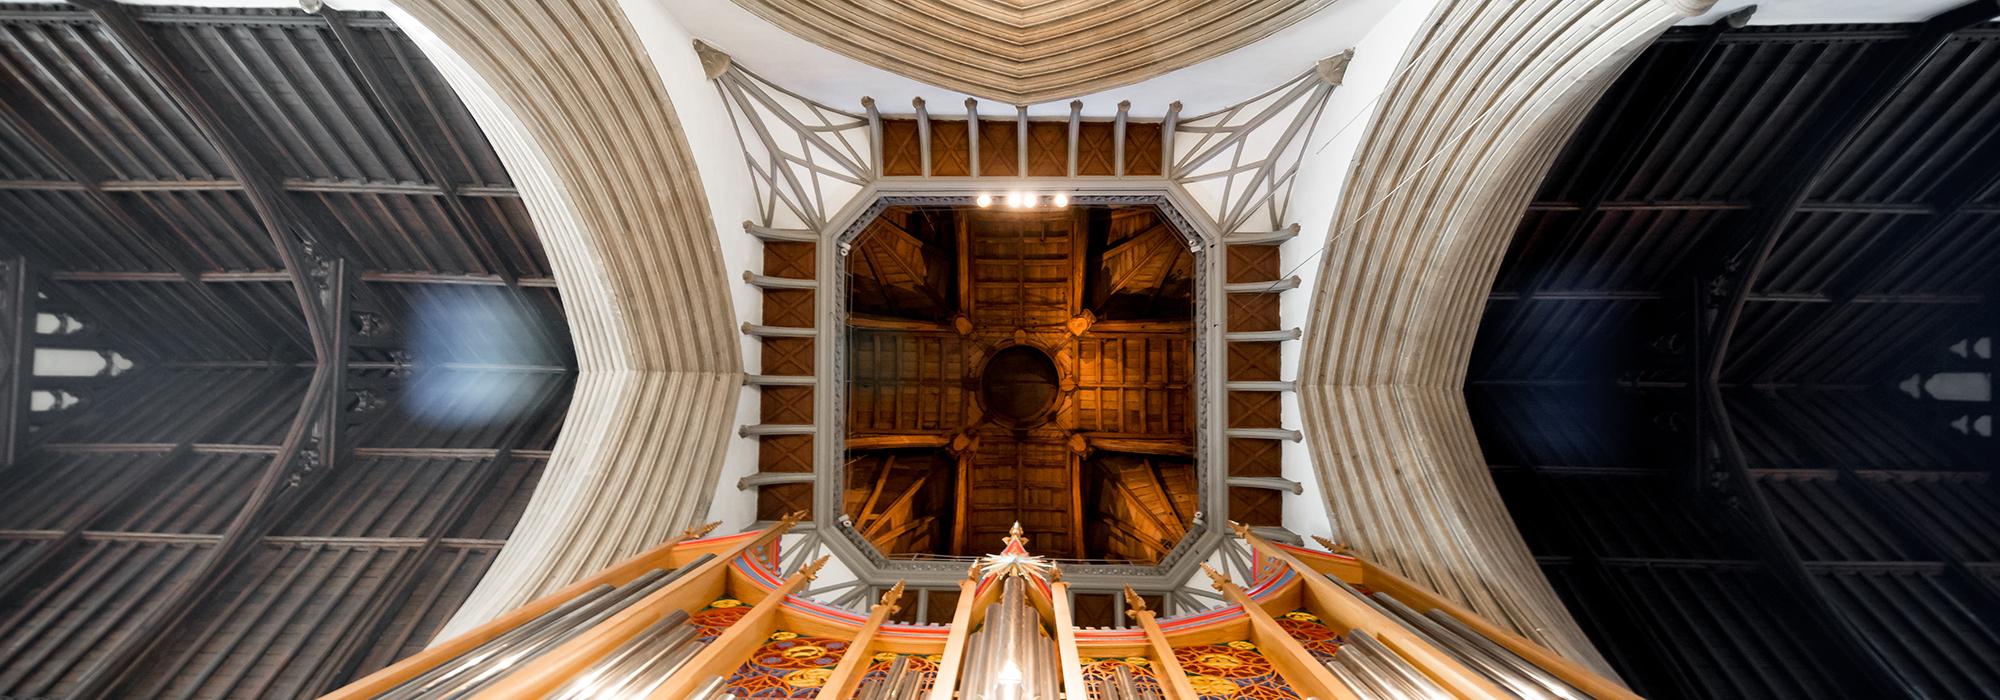 A view of the Merton College Chapel tower interior, from the floor of the Antechapel